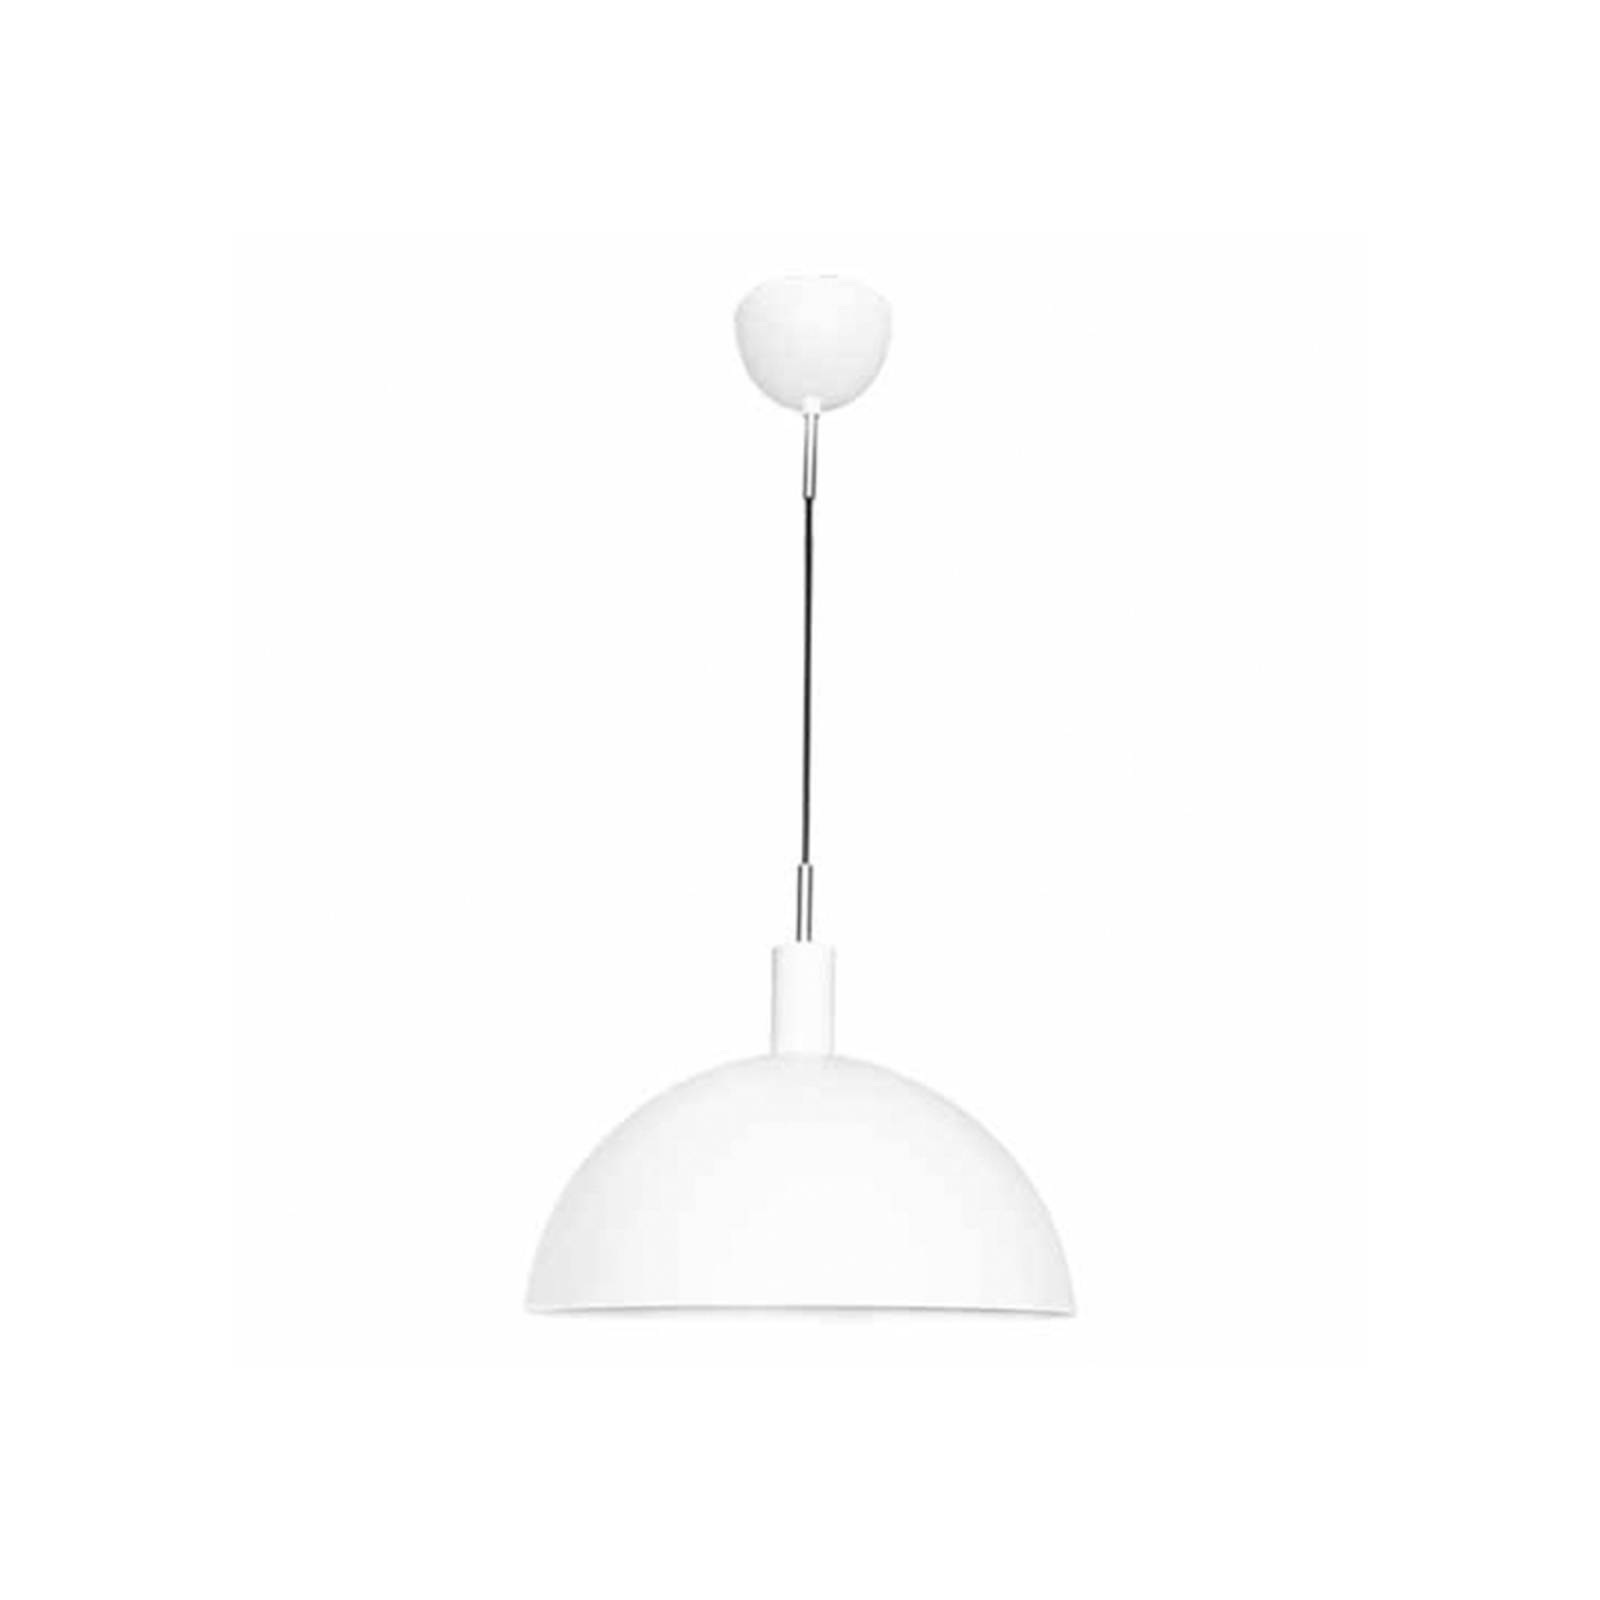 Image of By Rydéns Cabano suspension, 1 lampe, blanche 7391741018229